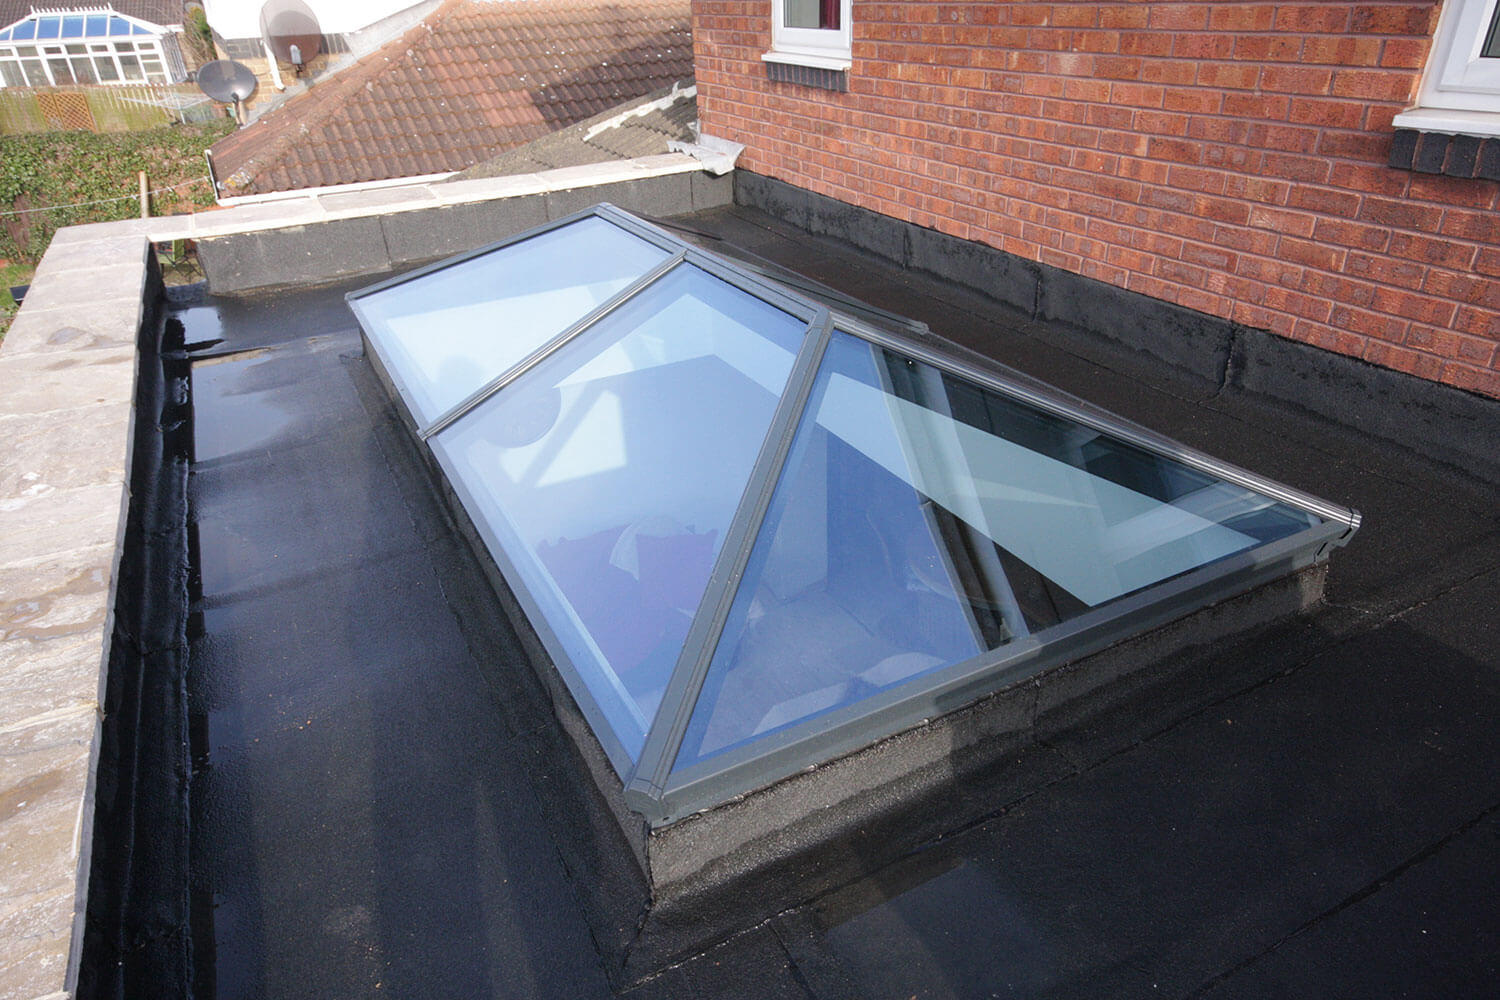 Roof Lanterns Installed for homeowners in Crowborough